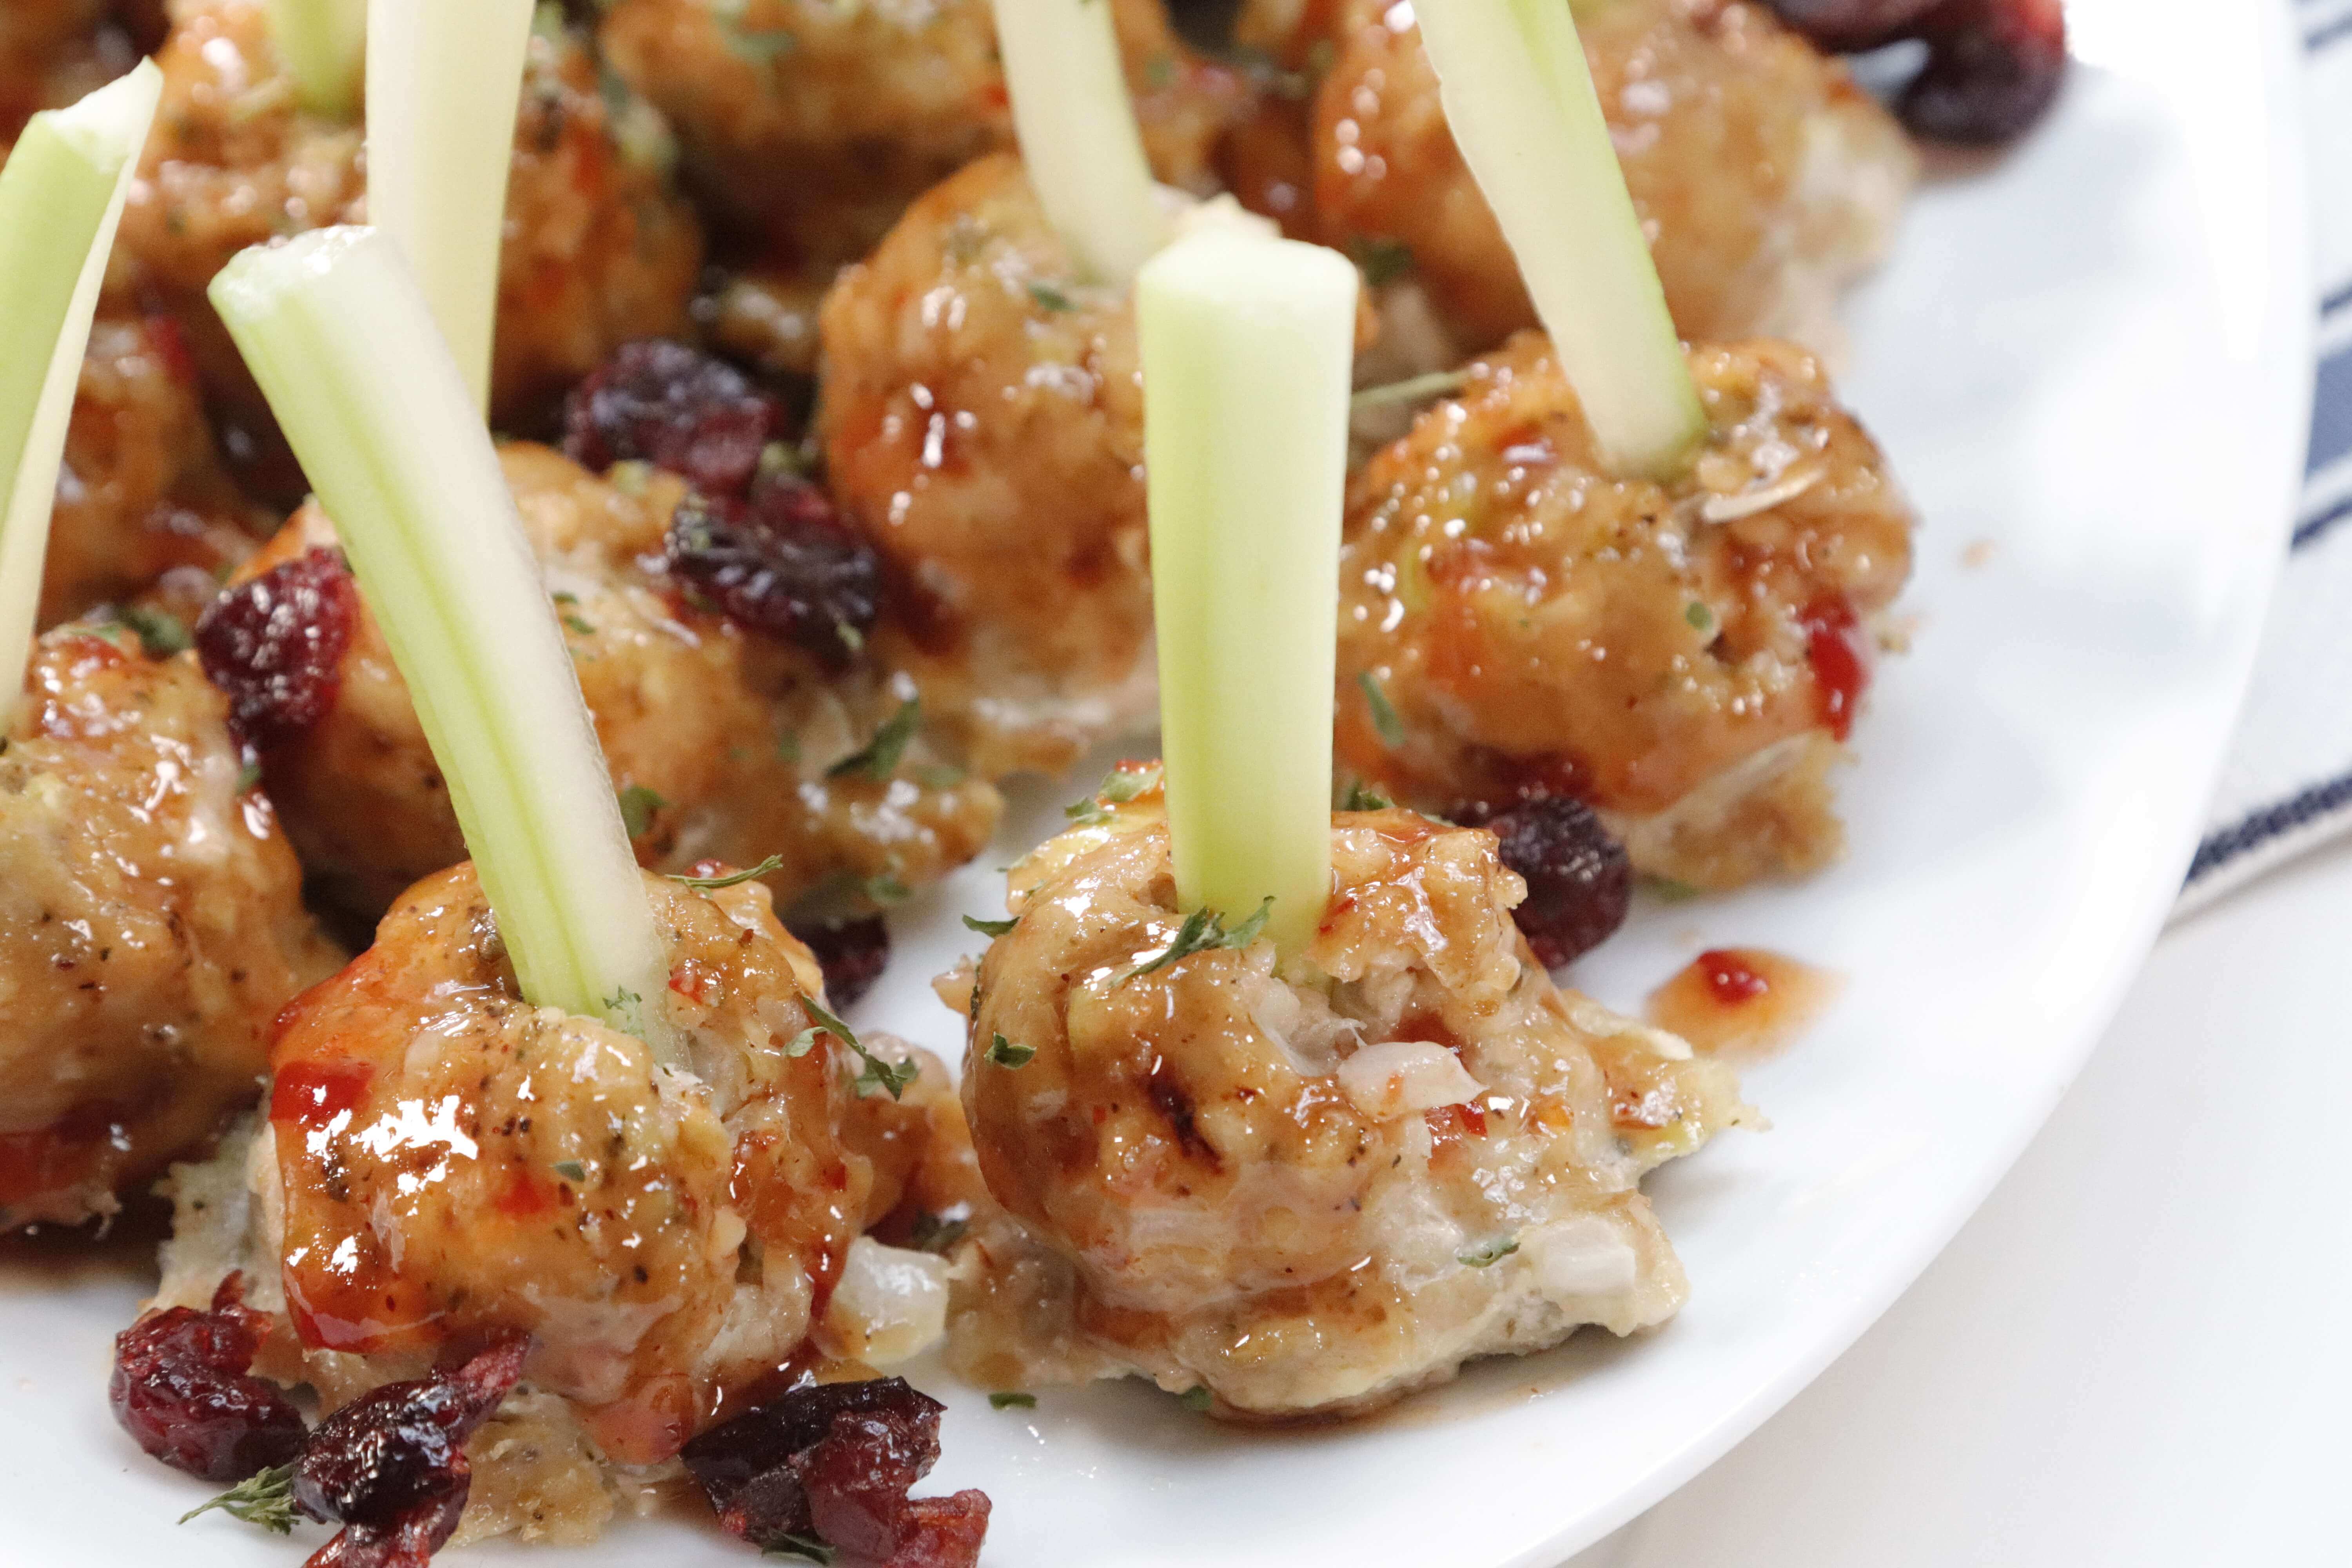 Turkey Meatballs and Celery with Cranberry Chili Sauce